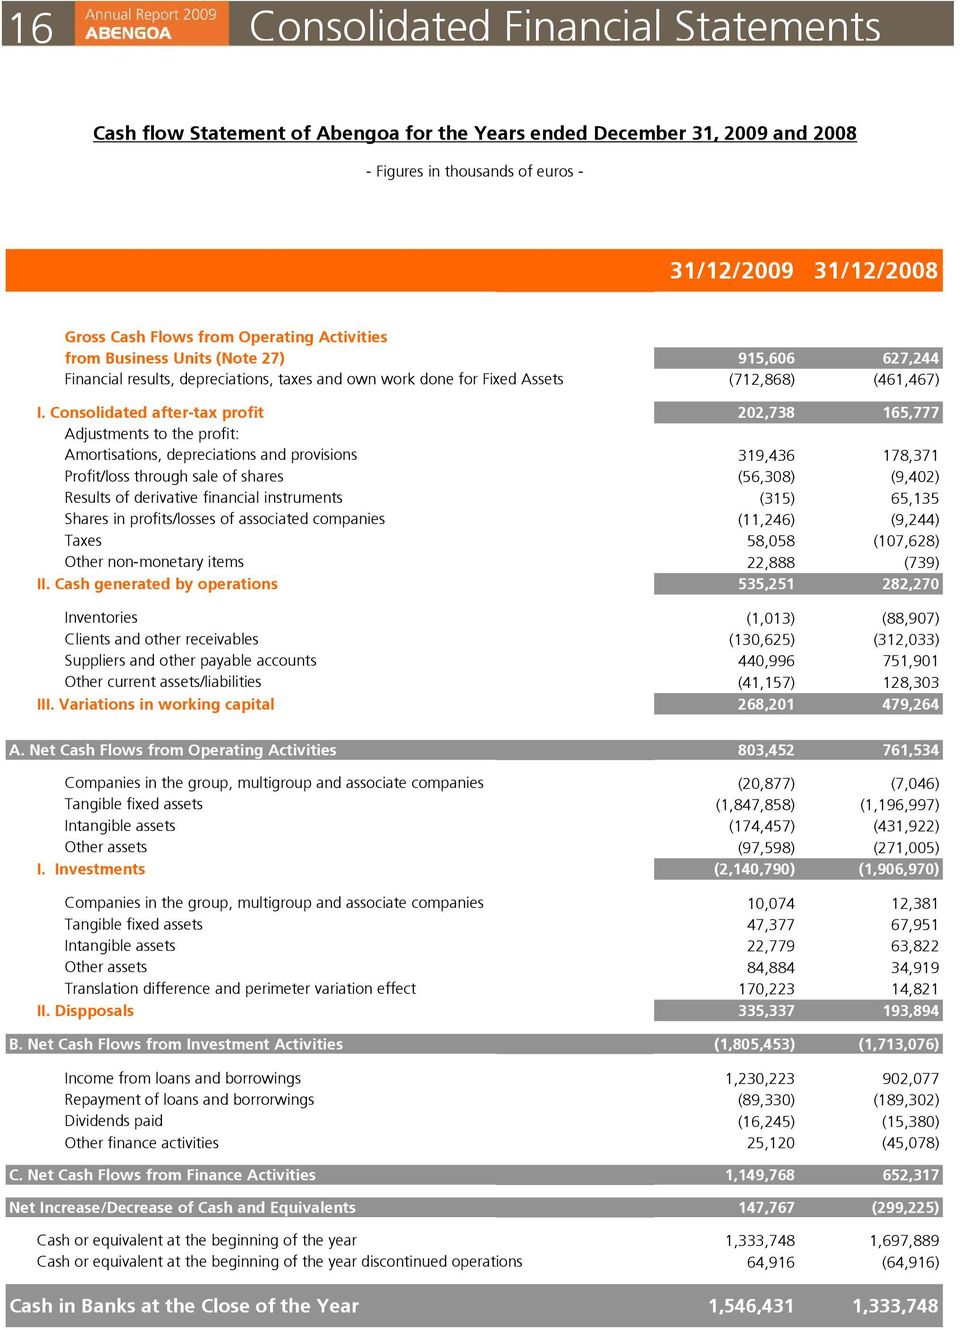 Consolidated after-tax profit 202,738 165,777 Adjustments to the profit: Amortisations, depreciations and provisions 319,436 178,371 Profit/loss through sale of shares (56,308) (9,402) Results of